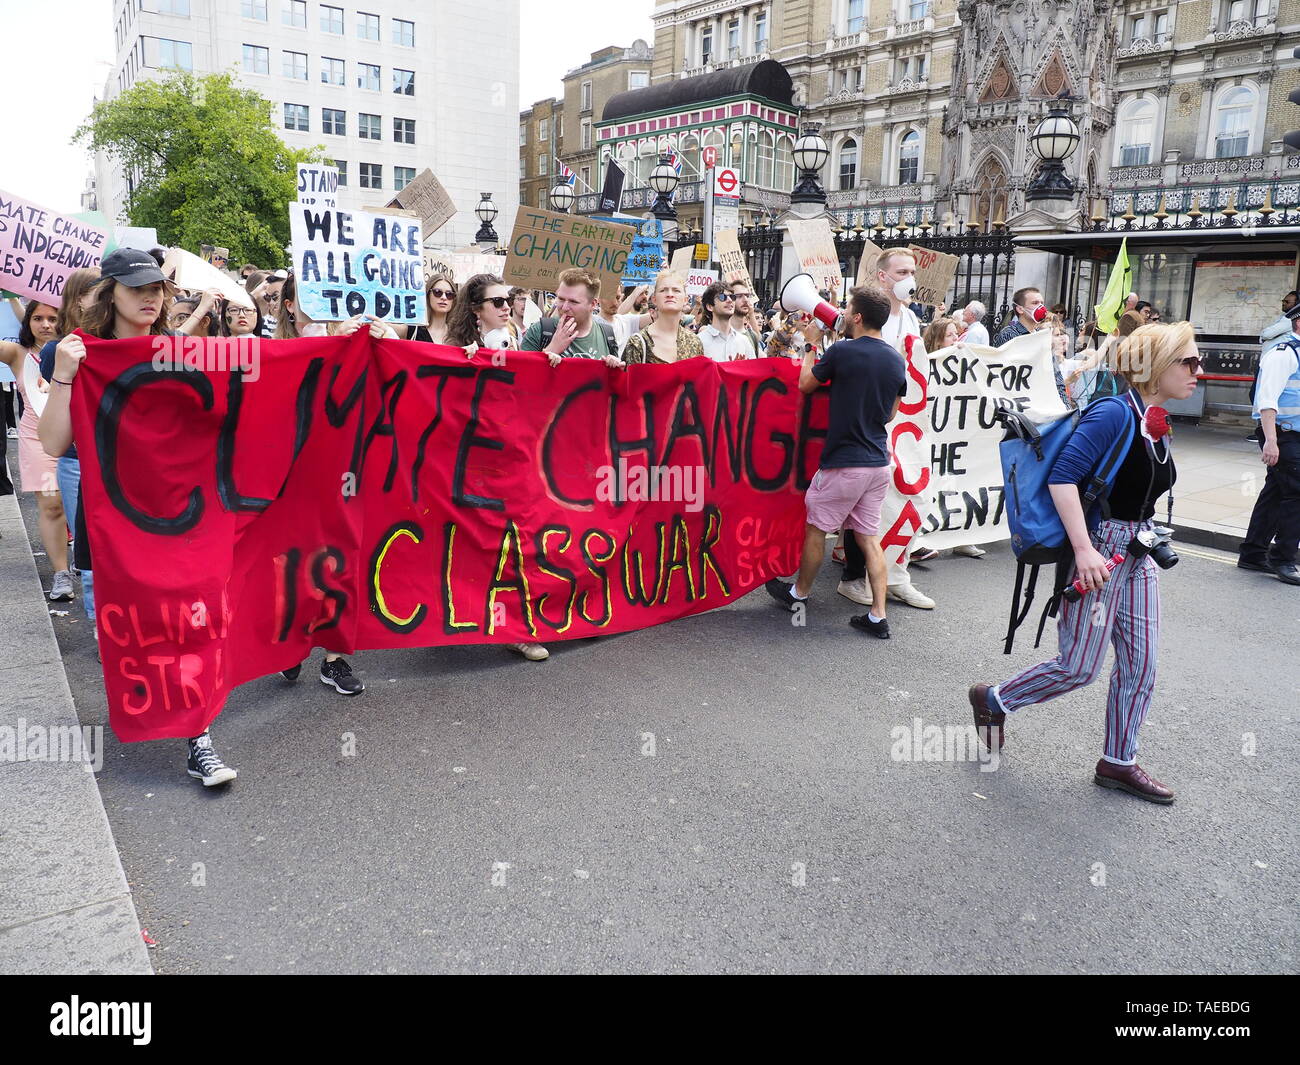 London, UK. 24th May, 2019. Students from Kings College London march for action on climate change along the Strand to meet up with the main protest event. Credit: Alan Gallery. Stock Photo